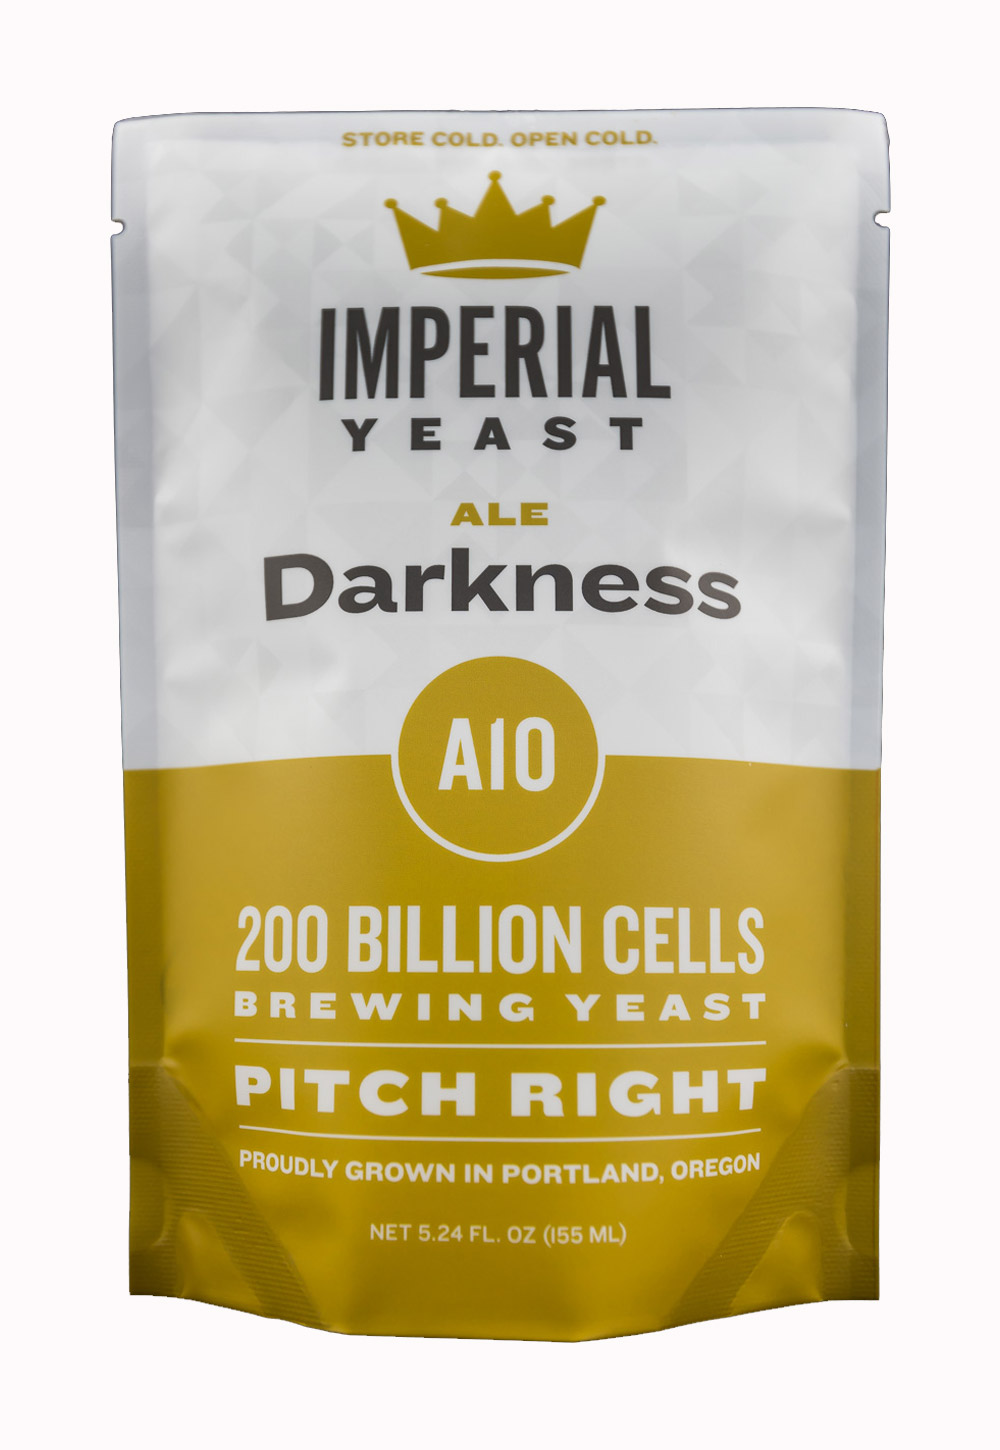 A10 Darkness Stout & Ale Yeast from Imperial Yeast